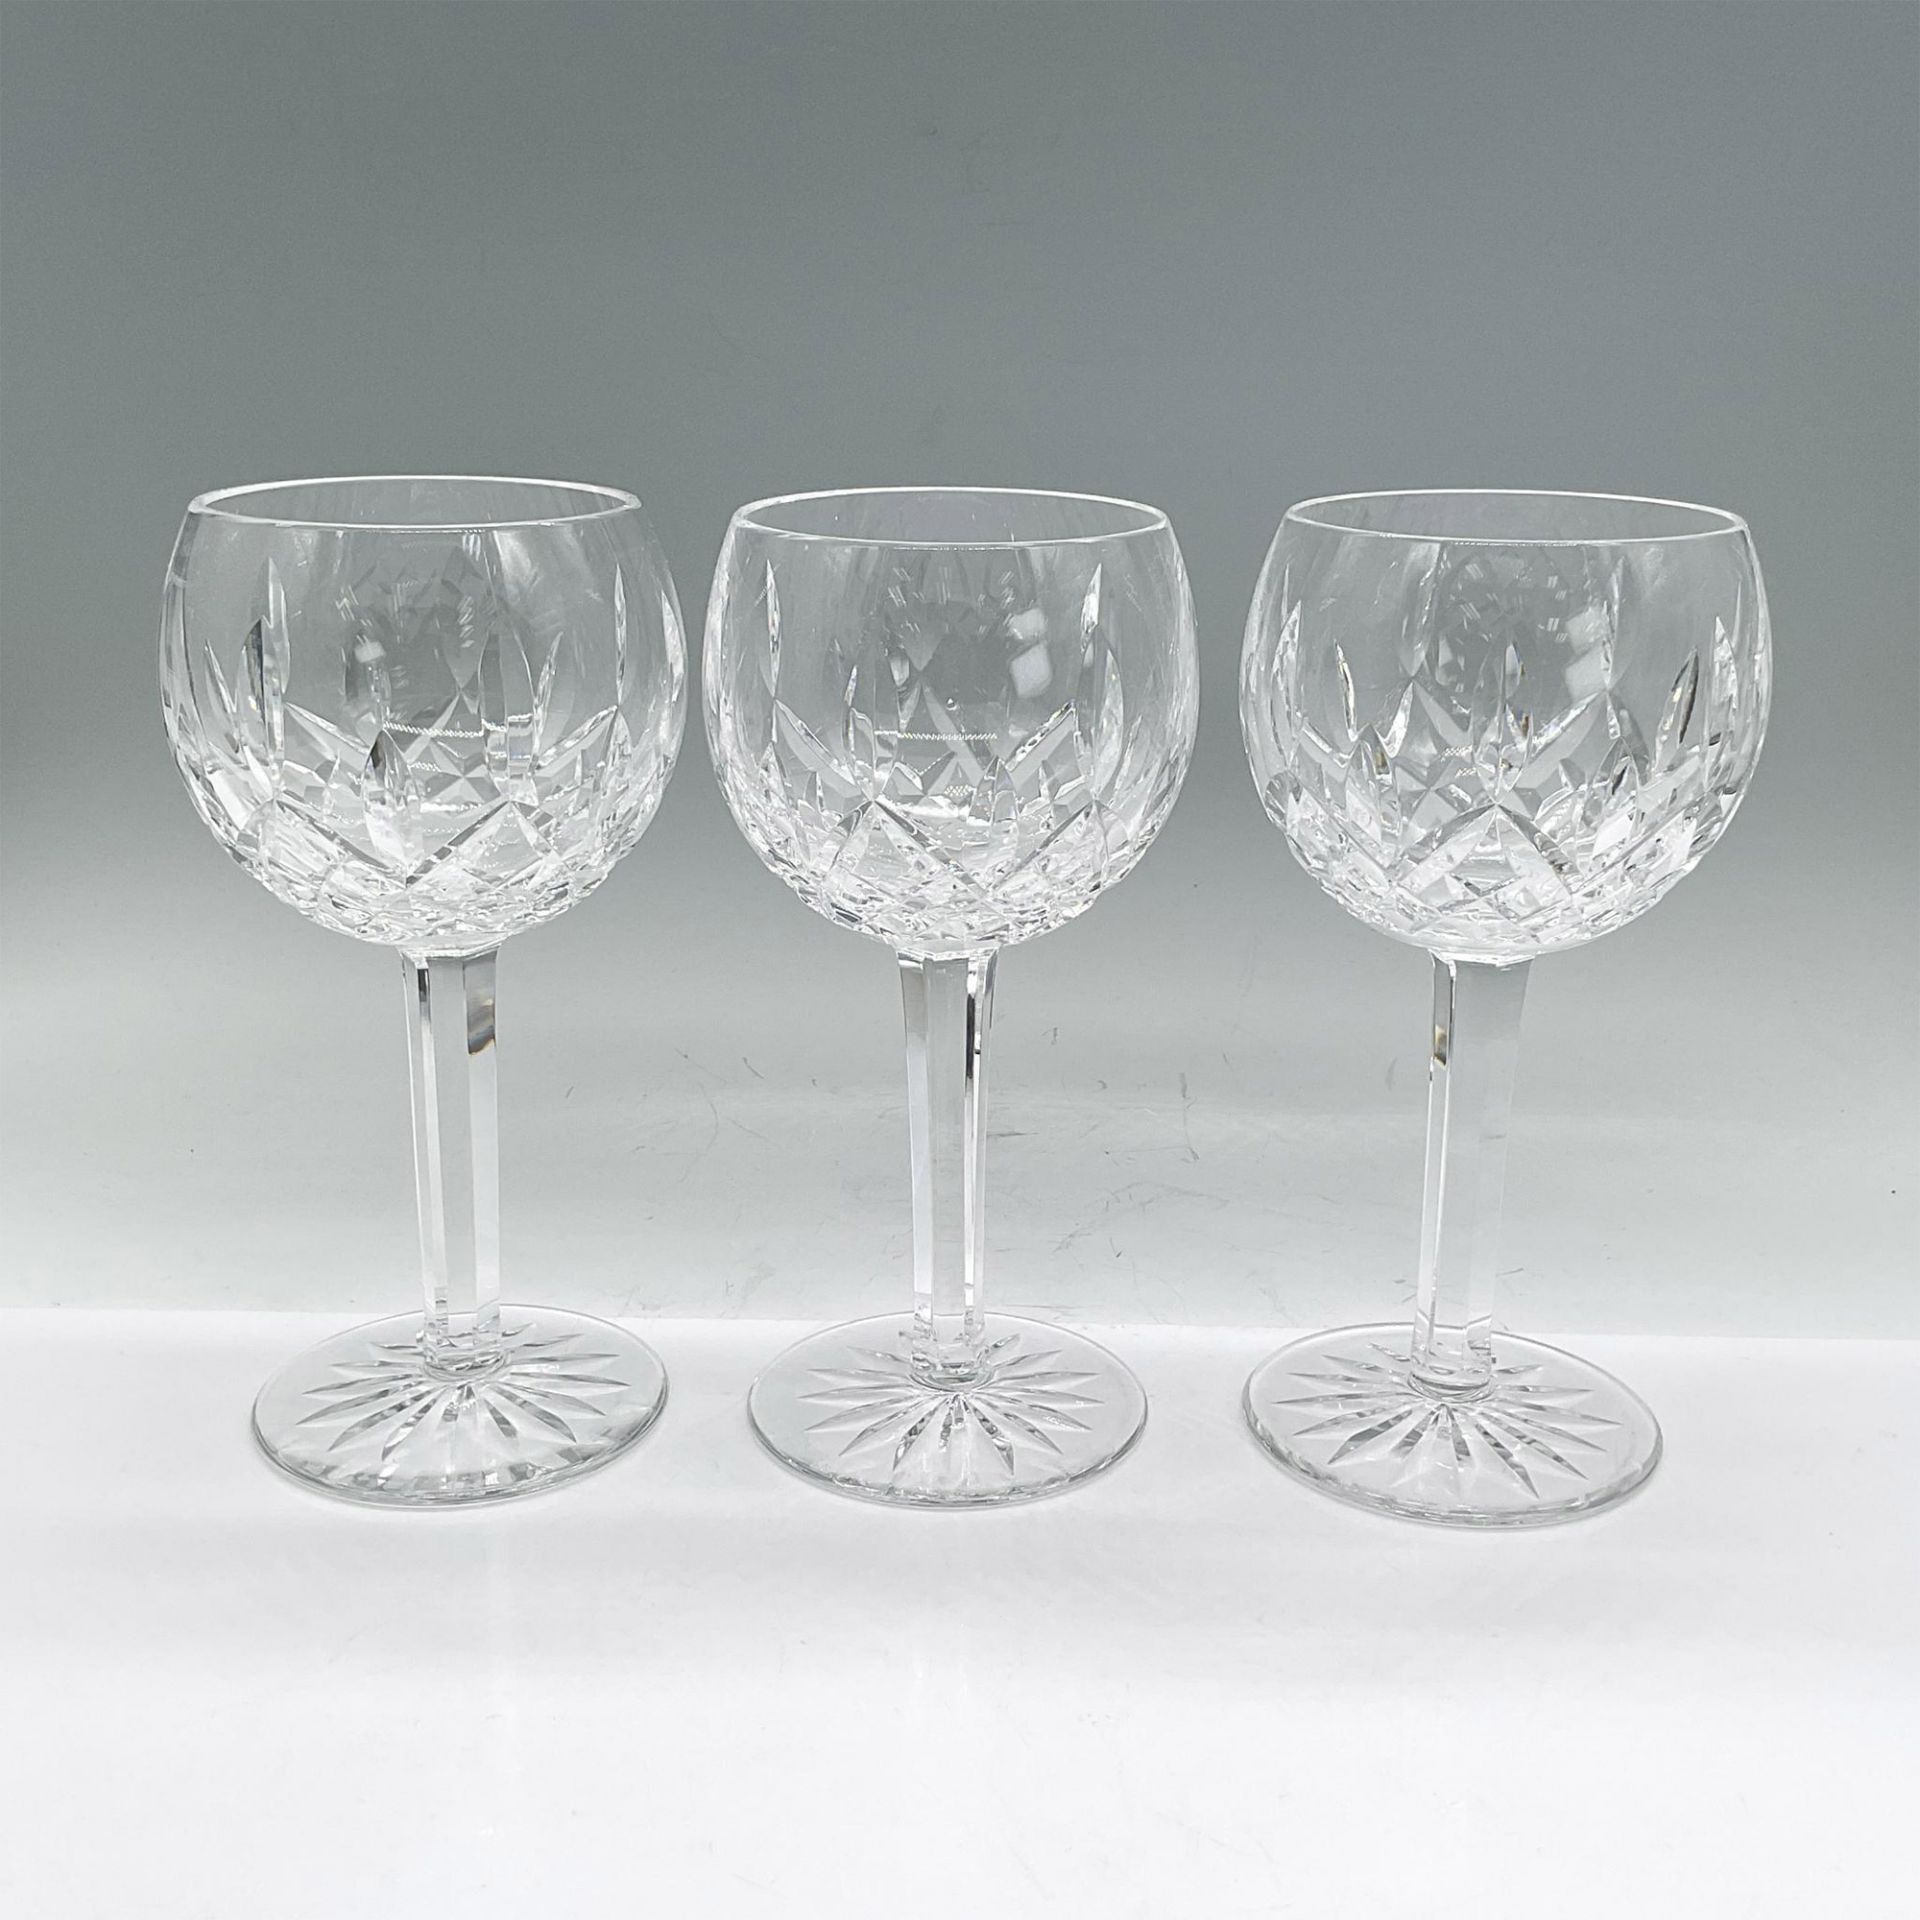 3pc Waterford Crystal Balloon Wine Glasses, Lismore